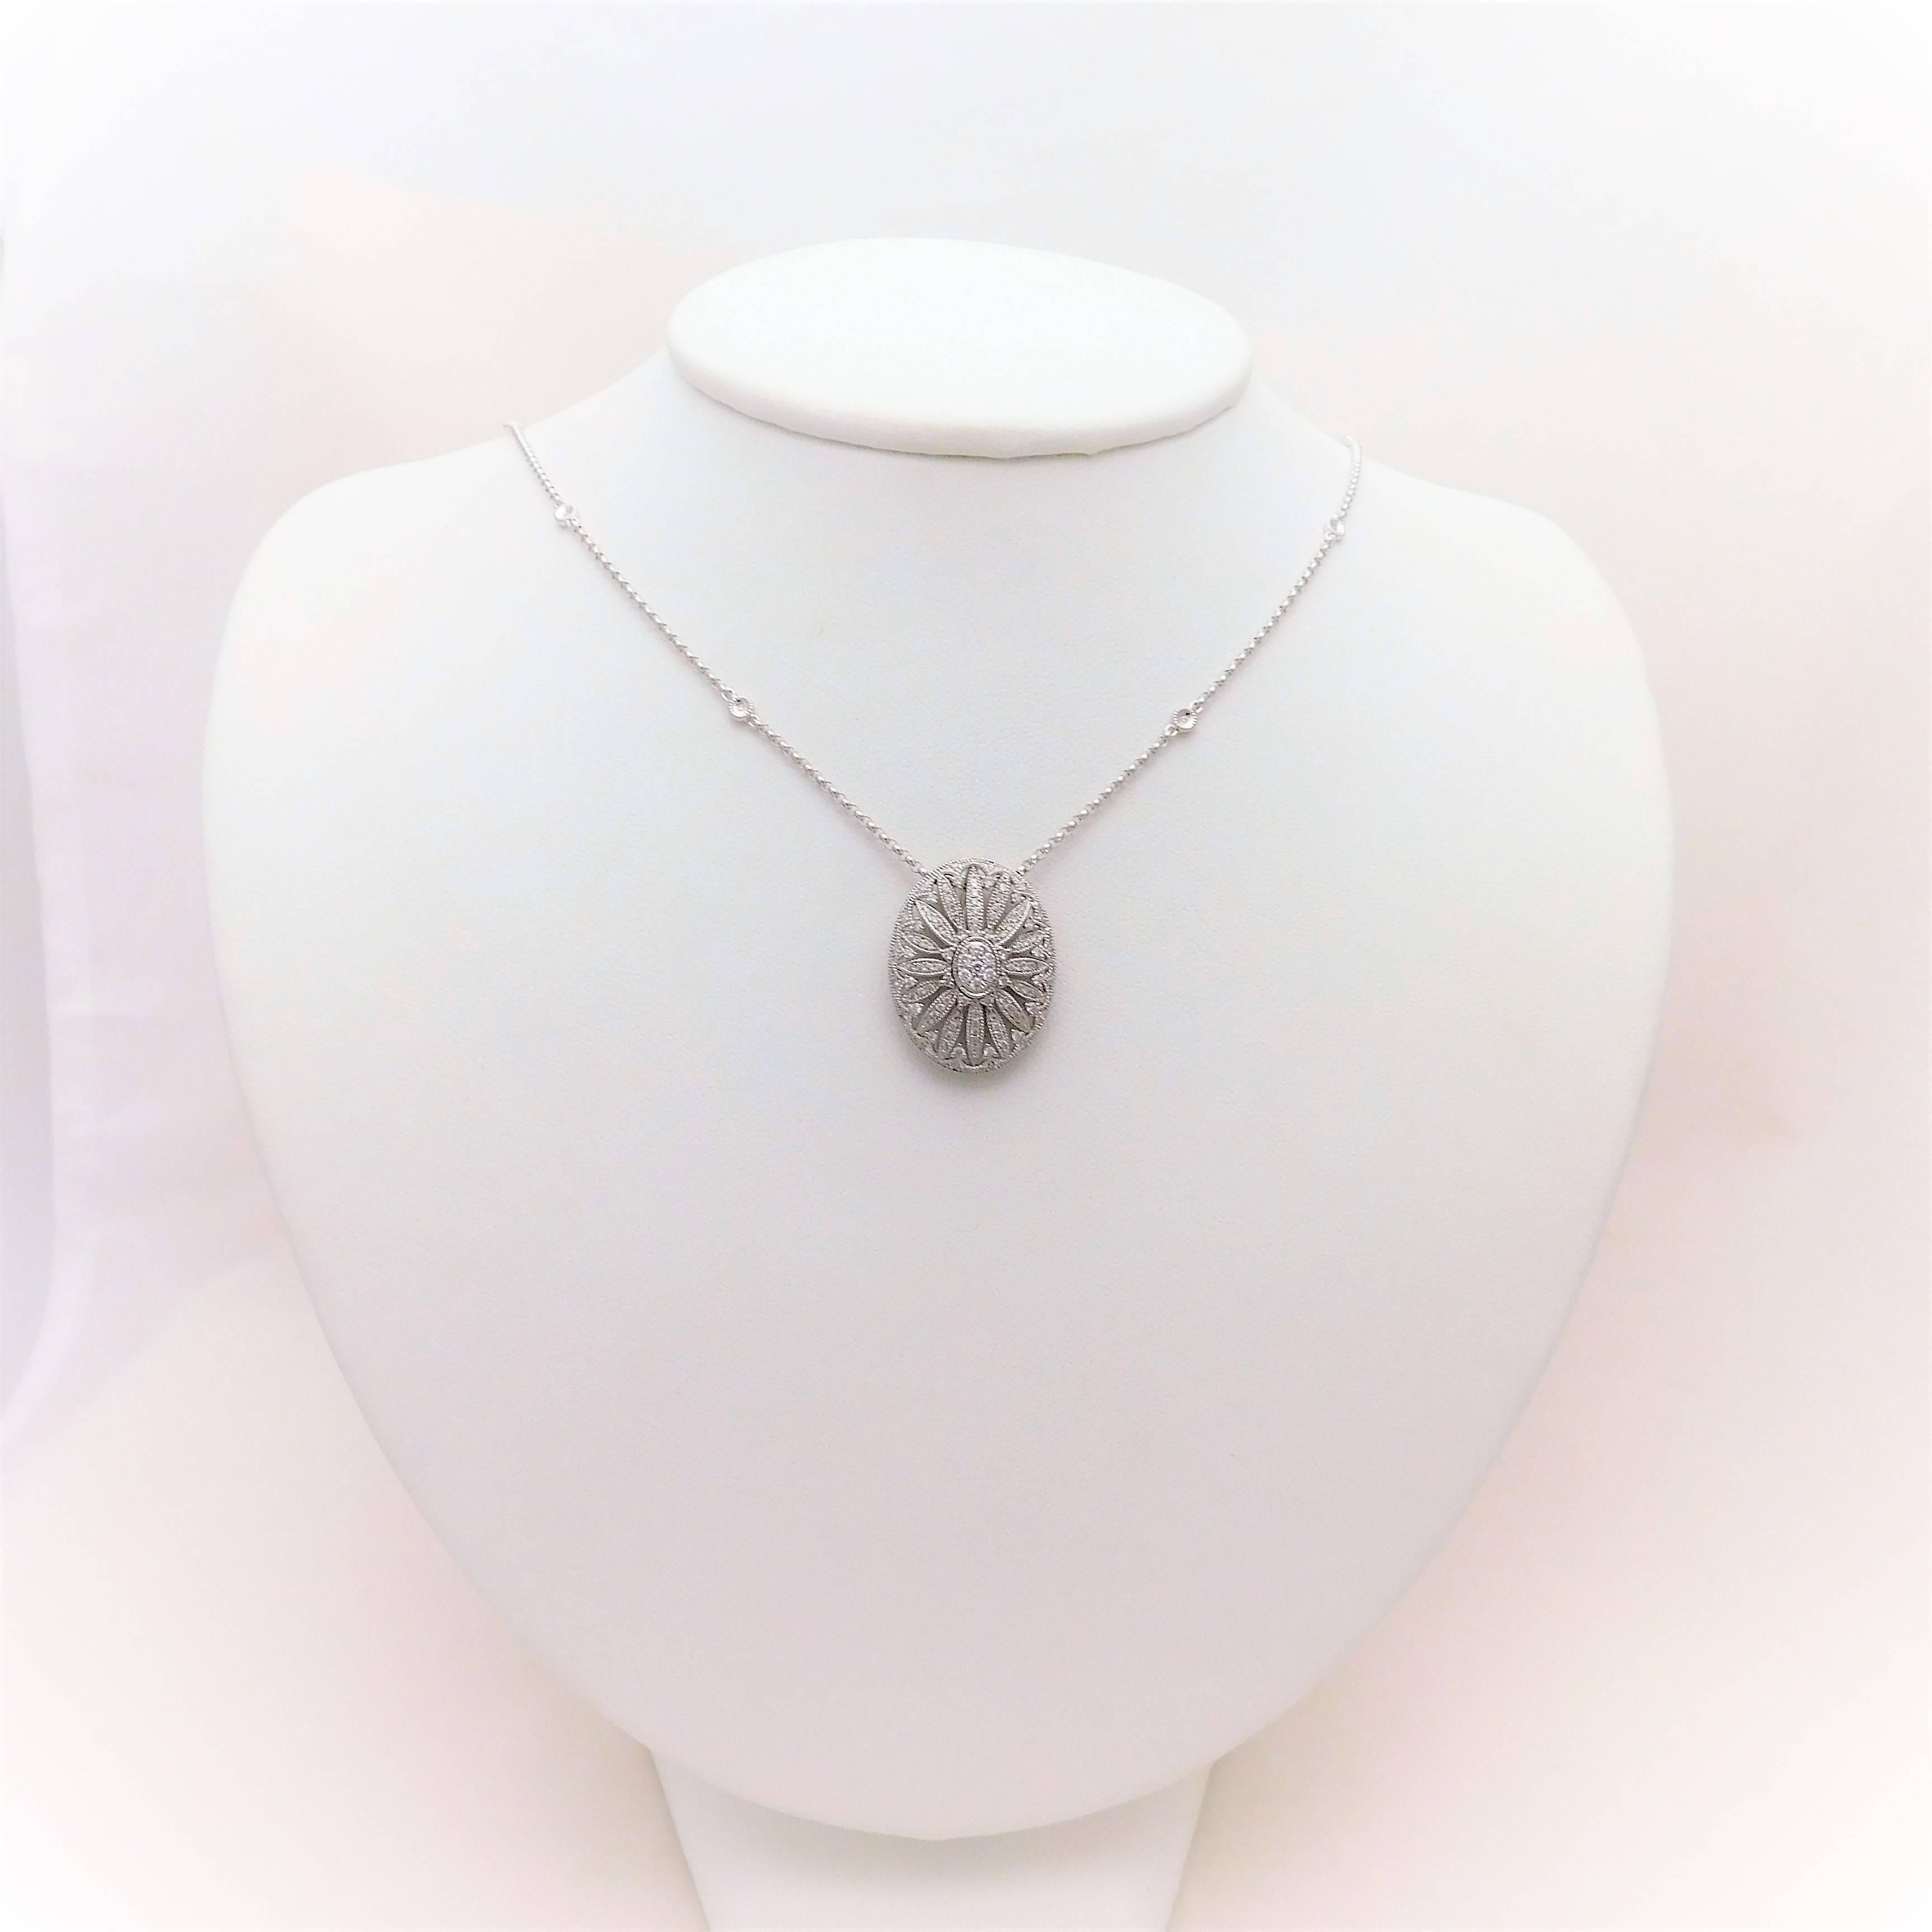 From a beautiful Southern estate.  One of the loveliest necklaces we have acquired in quite some time.  This miraculous oval shaped diamond cluster pendant necklace has been crafted in solid 14k white gold.  It is masterfully jeweled with 111 round